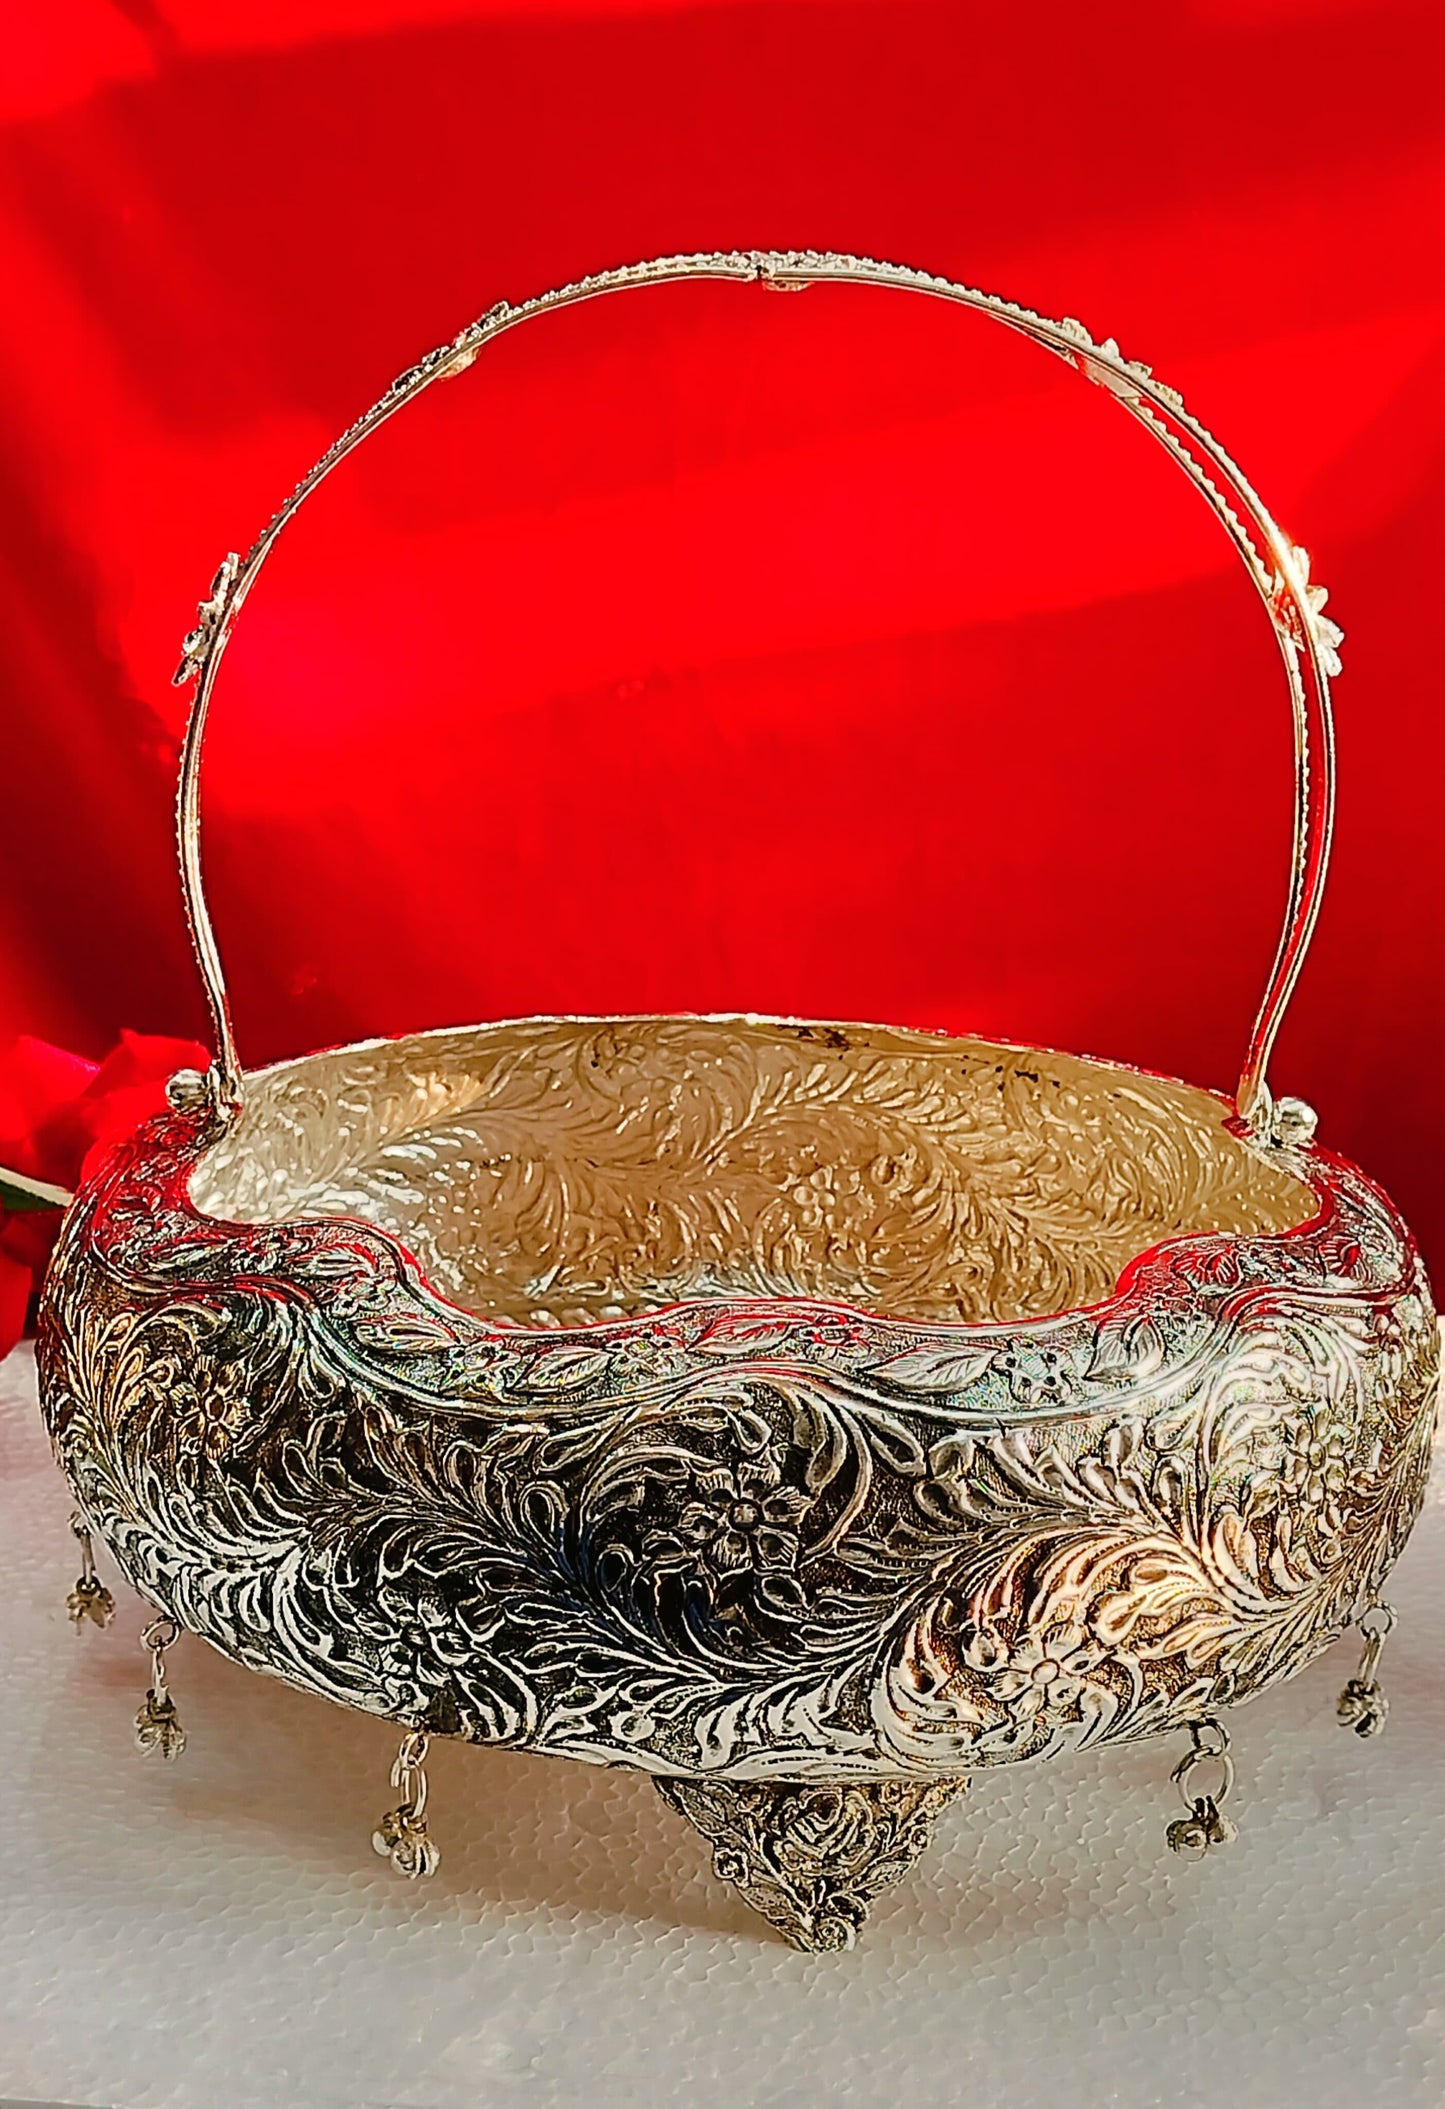 German Silver Antique Basket | Premium Silver Plated Basket with Handle